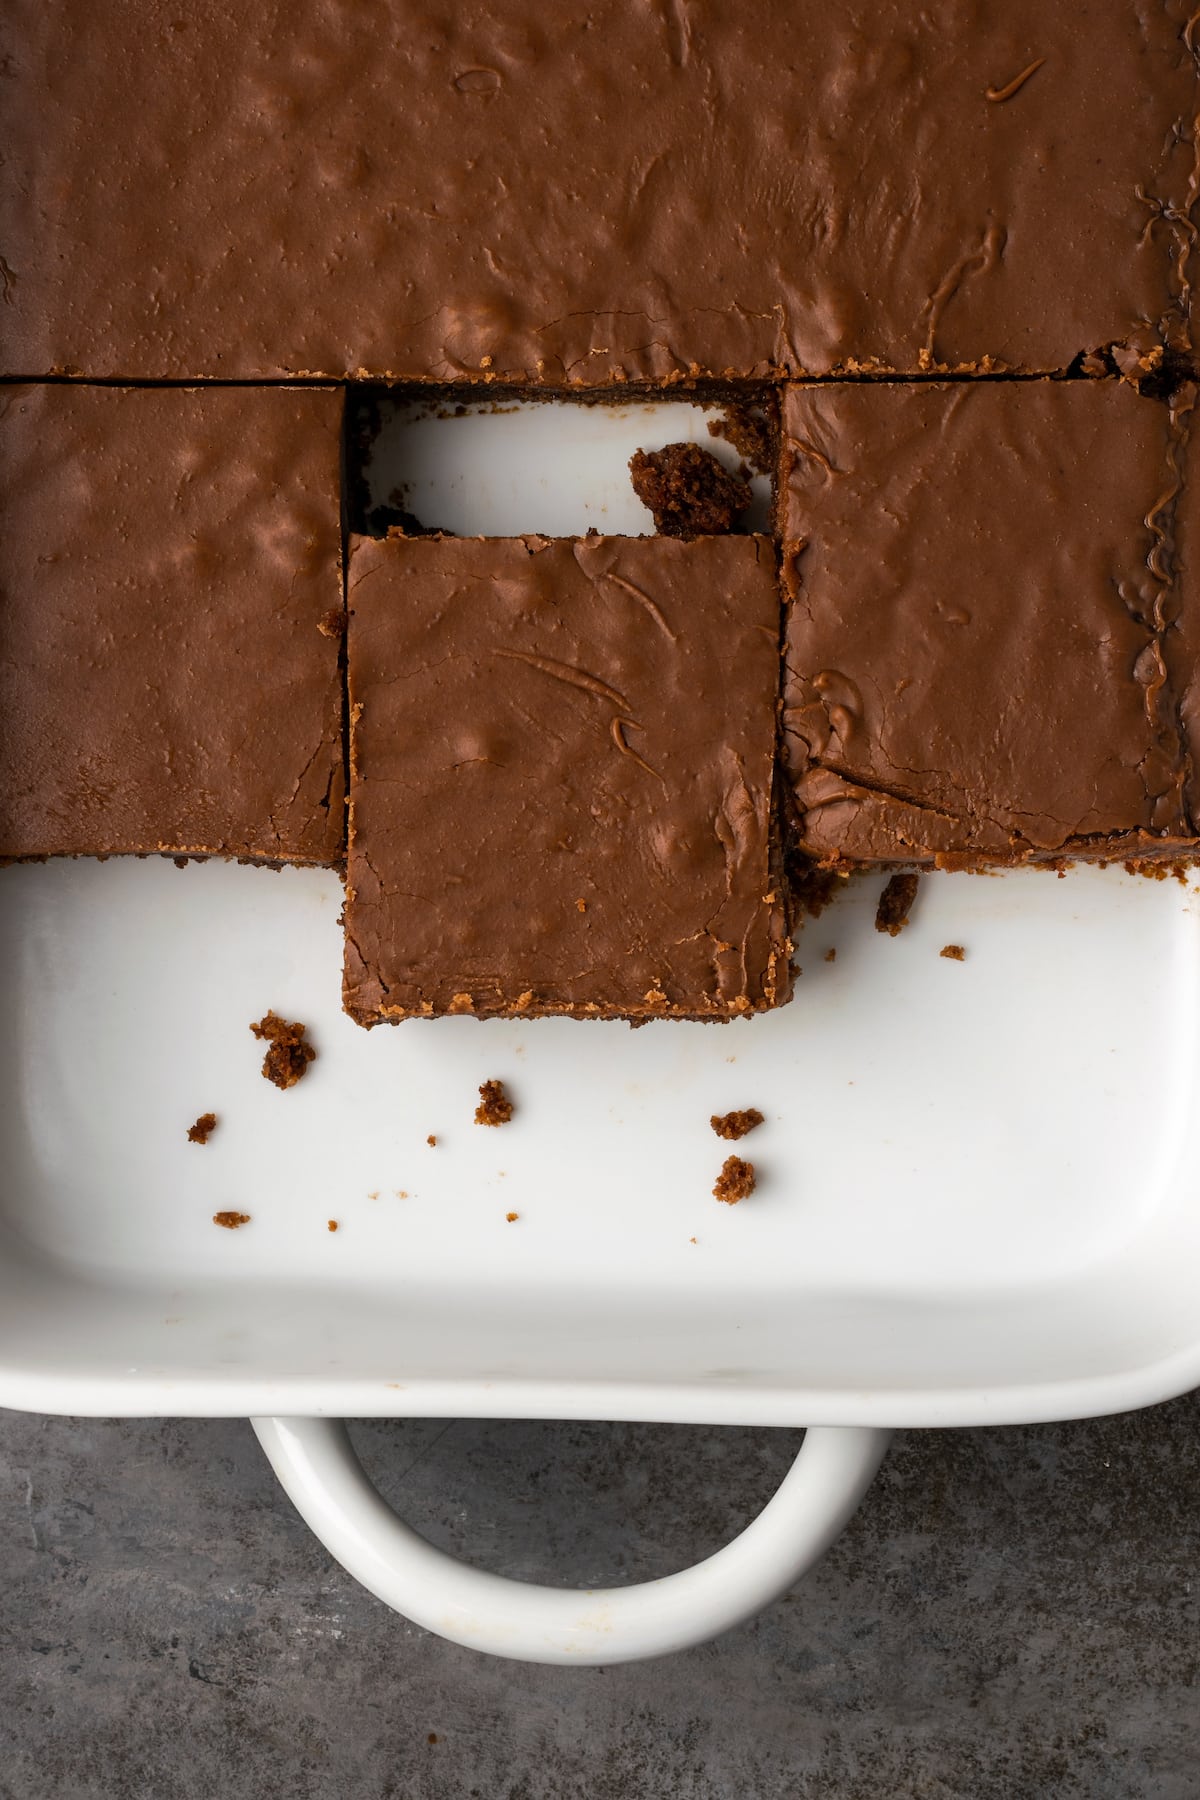 Overhead view of chocolate sheet cake slices in a baking dish.